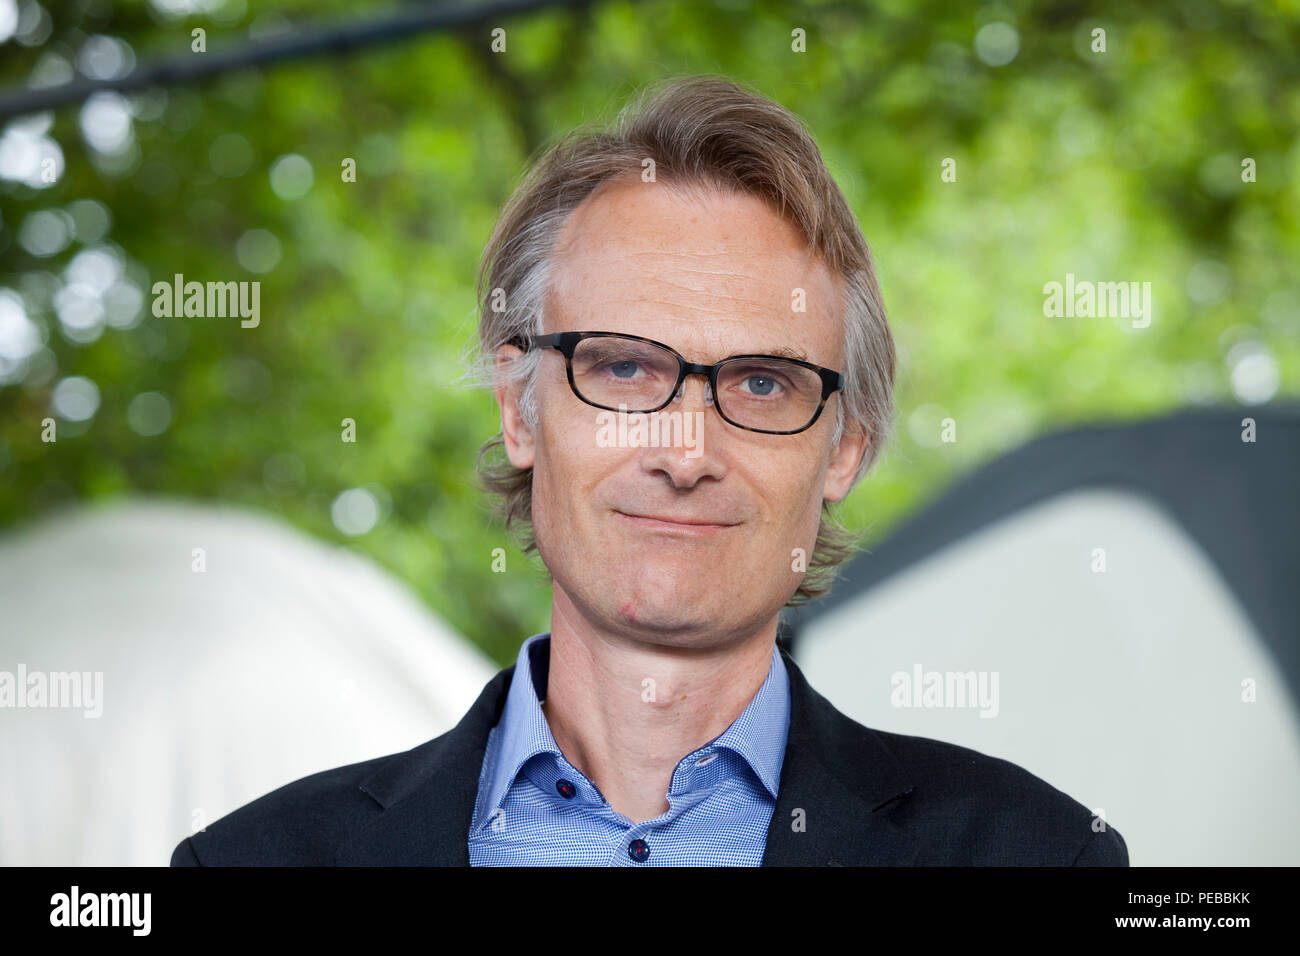 Edinburgh, UK. 14th August, 2018. Richard Lloyd Parry, the British foreign correspondent and writer. He is the Asia Editor of The Times of London, based in Tokyo, and is the author of non-fiction books. Pictured at the Edinburgh International Book Festival. Edinburgh, Scotland.  Picture by Gary Doak / Alamy Live News Stock Photo